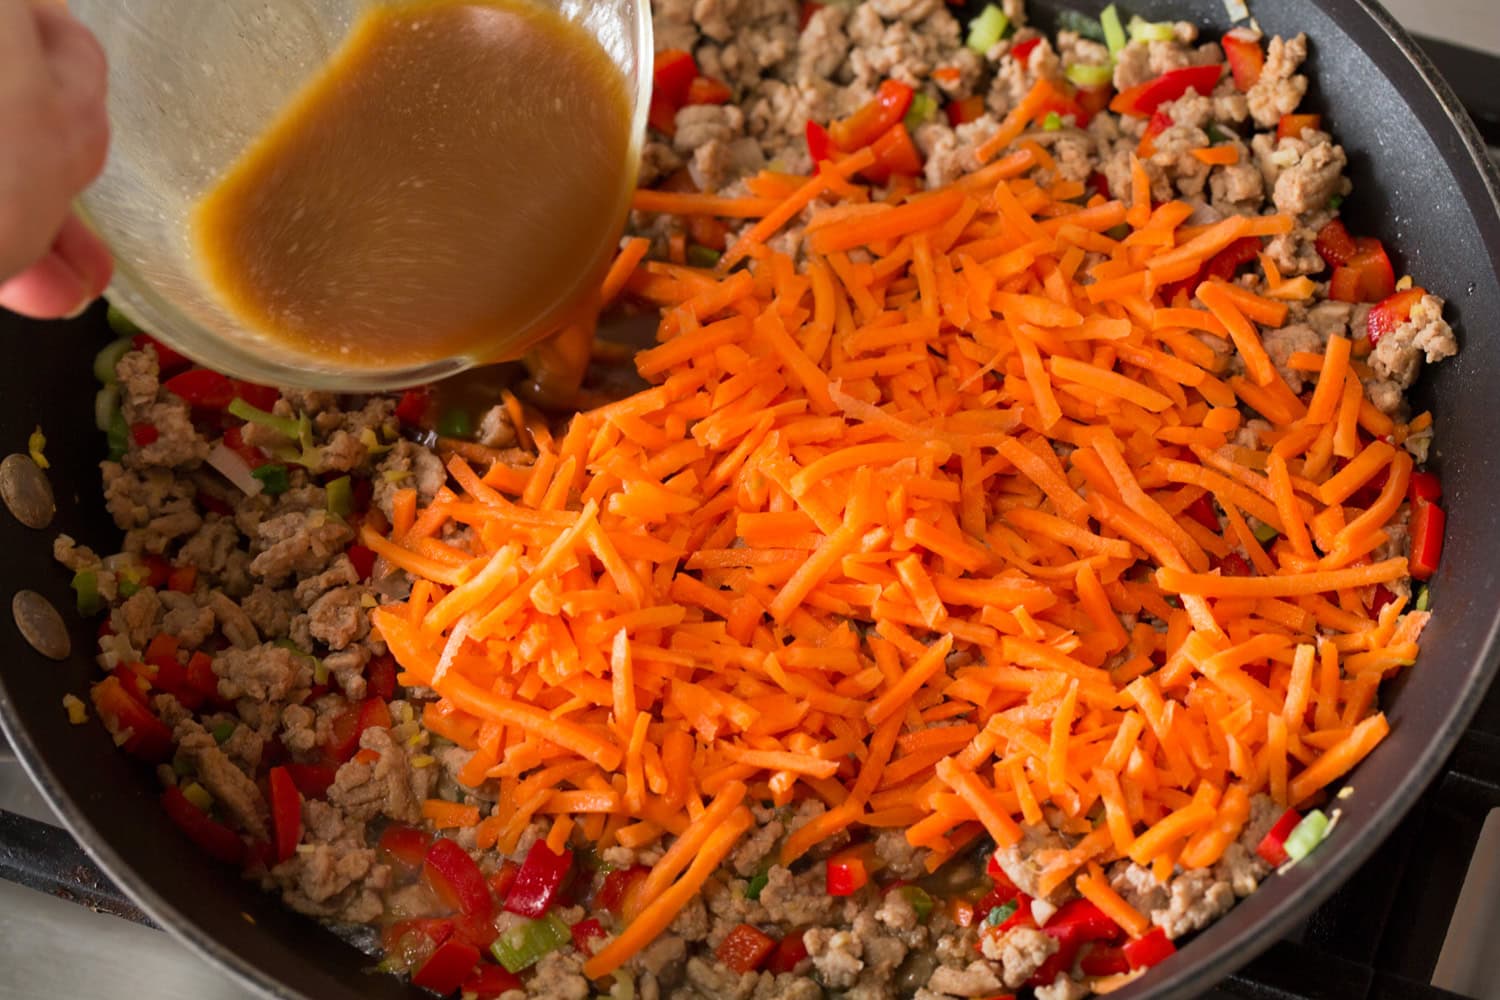 Carrots added to the ground meat mixture in the skillet.